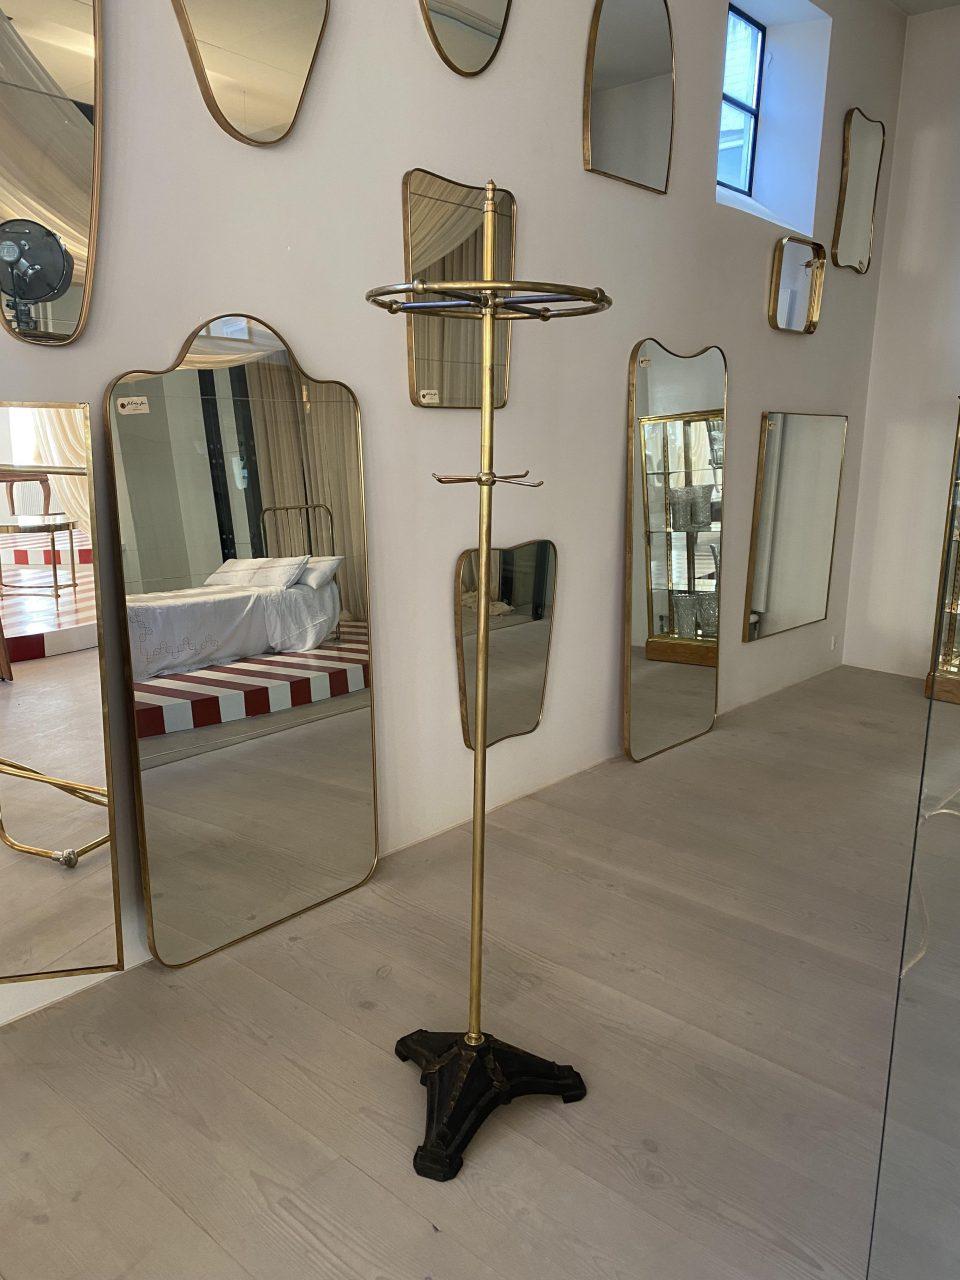 Stately and elegant early 1900s French coat and hat stand, which has a distinctive and sculptural design. A circular wreath at the top provdes space to hang hangers with jackets and coats.

This dumb waiter is a piece of beautifully executed